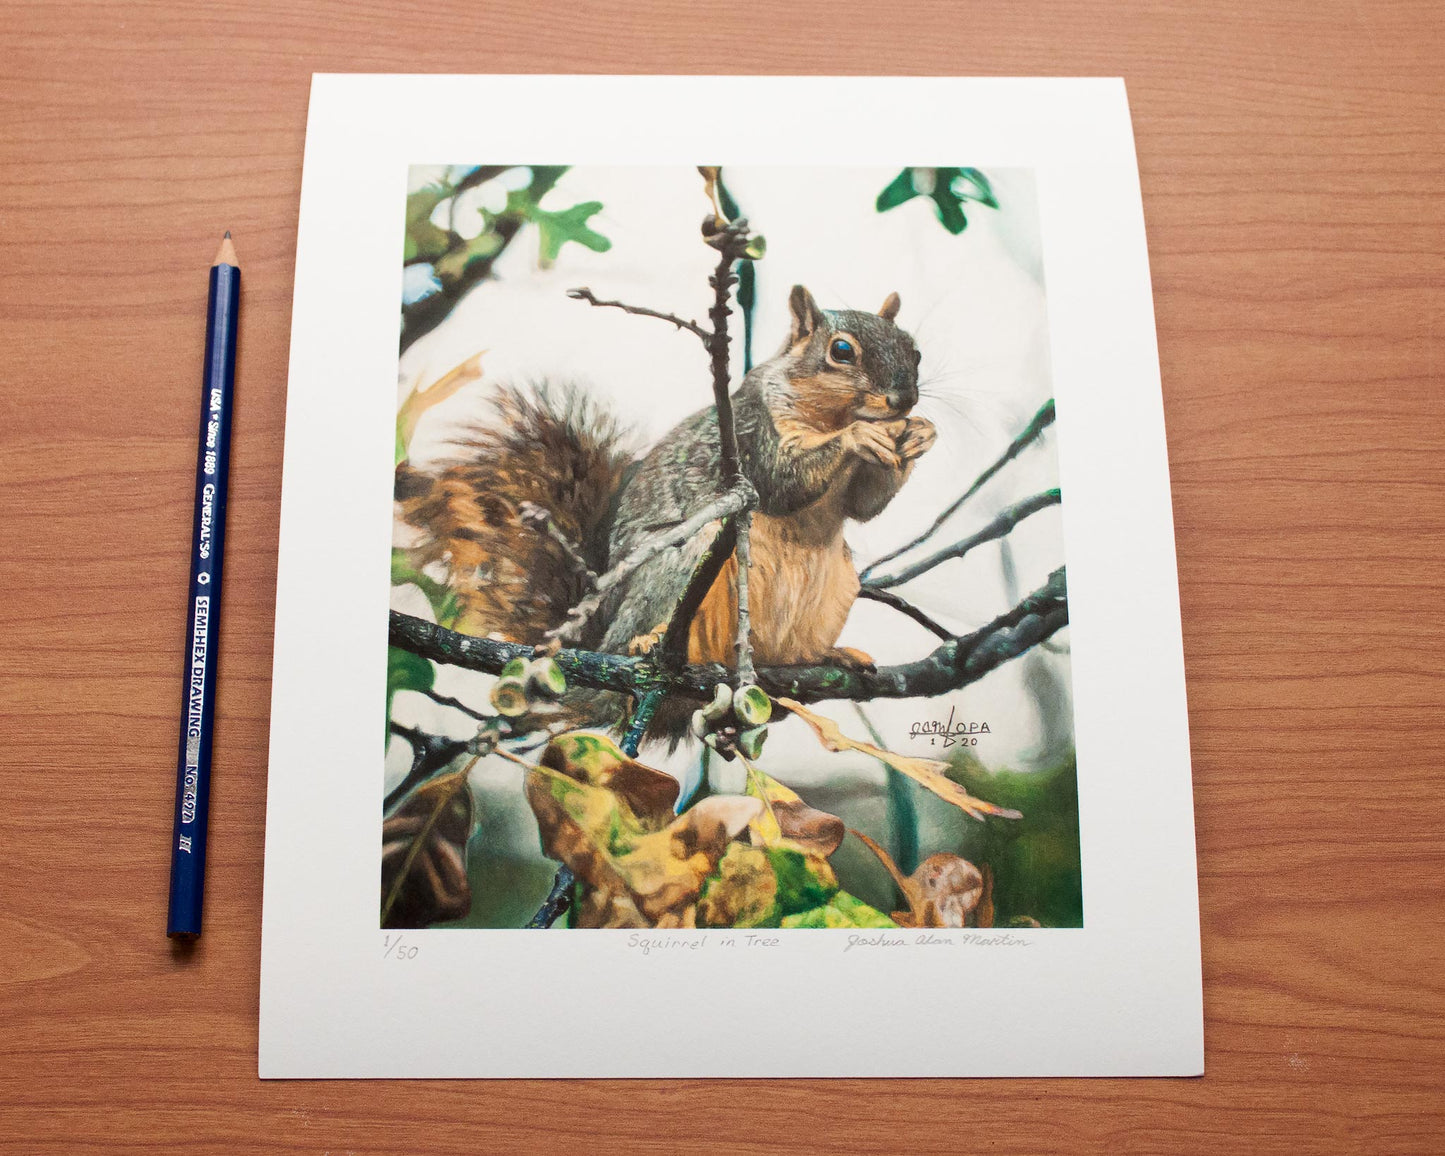 Signed fine art print by artist Joshua Martin of Squirrel in Tree.